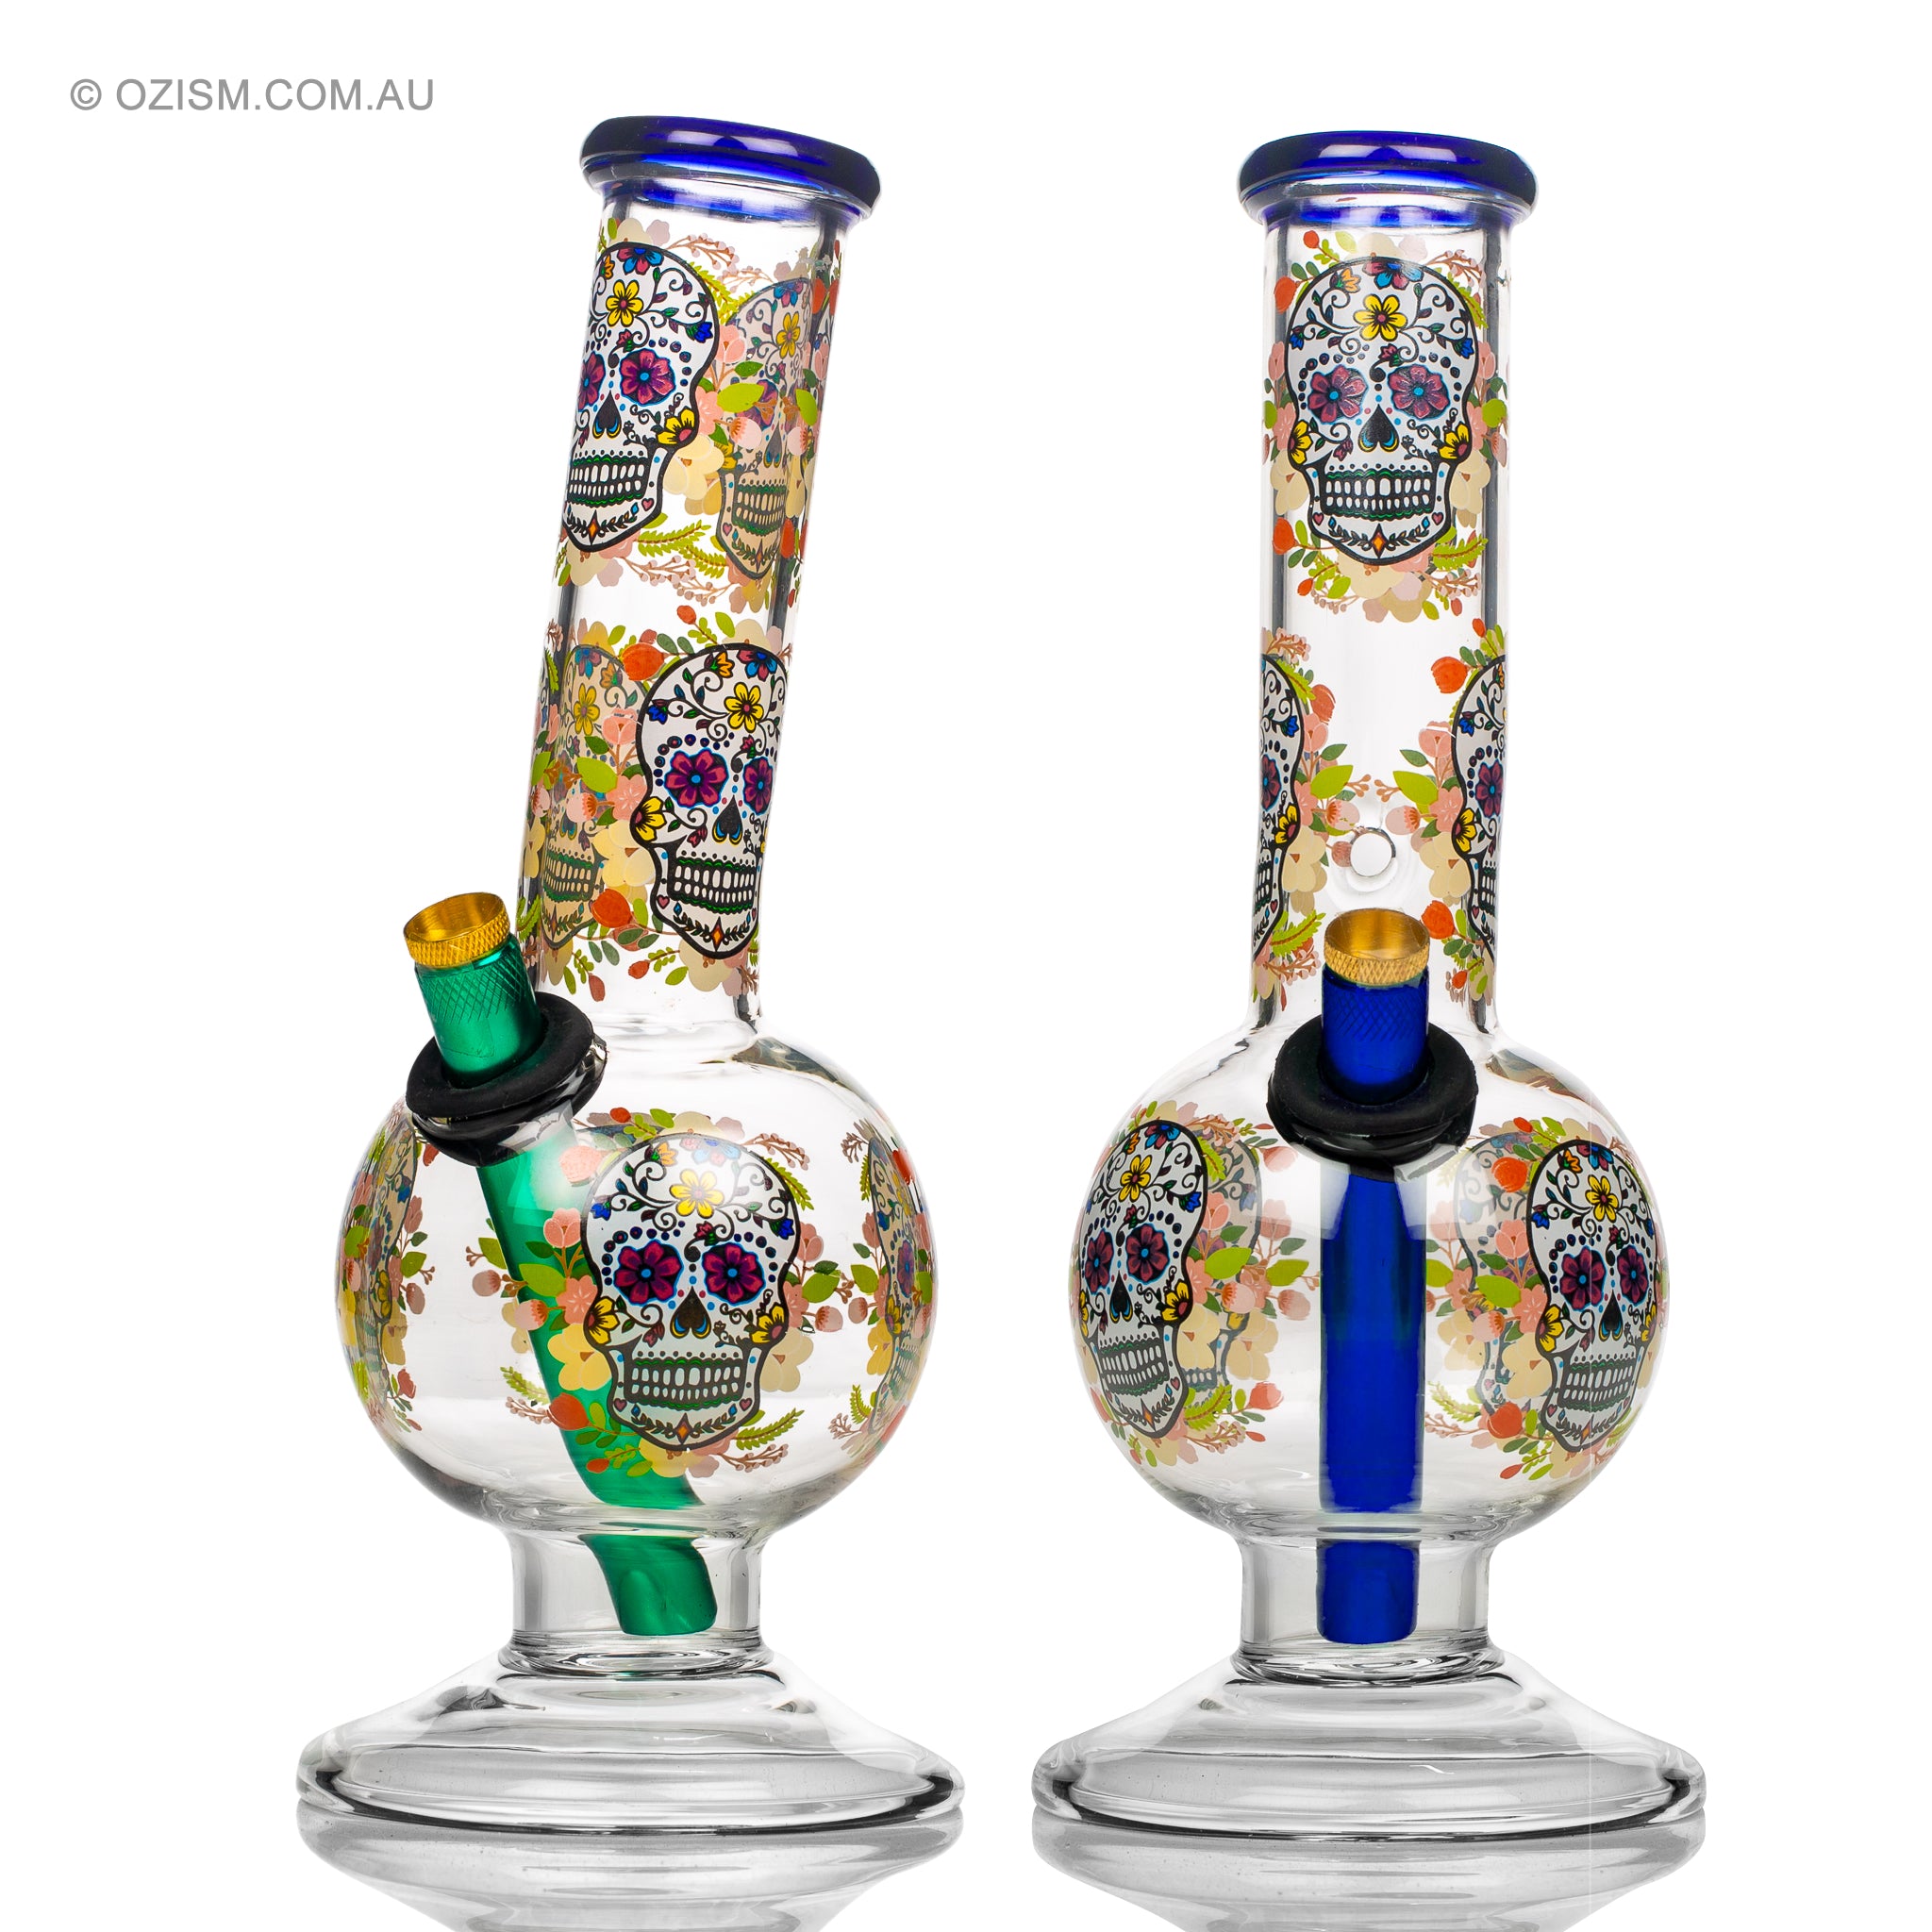 Aussie style glass bong with skull decals.